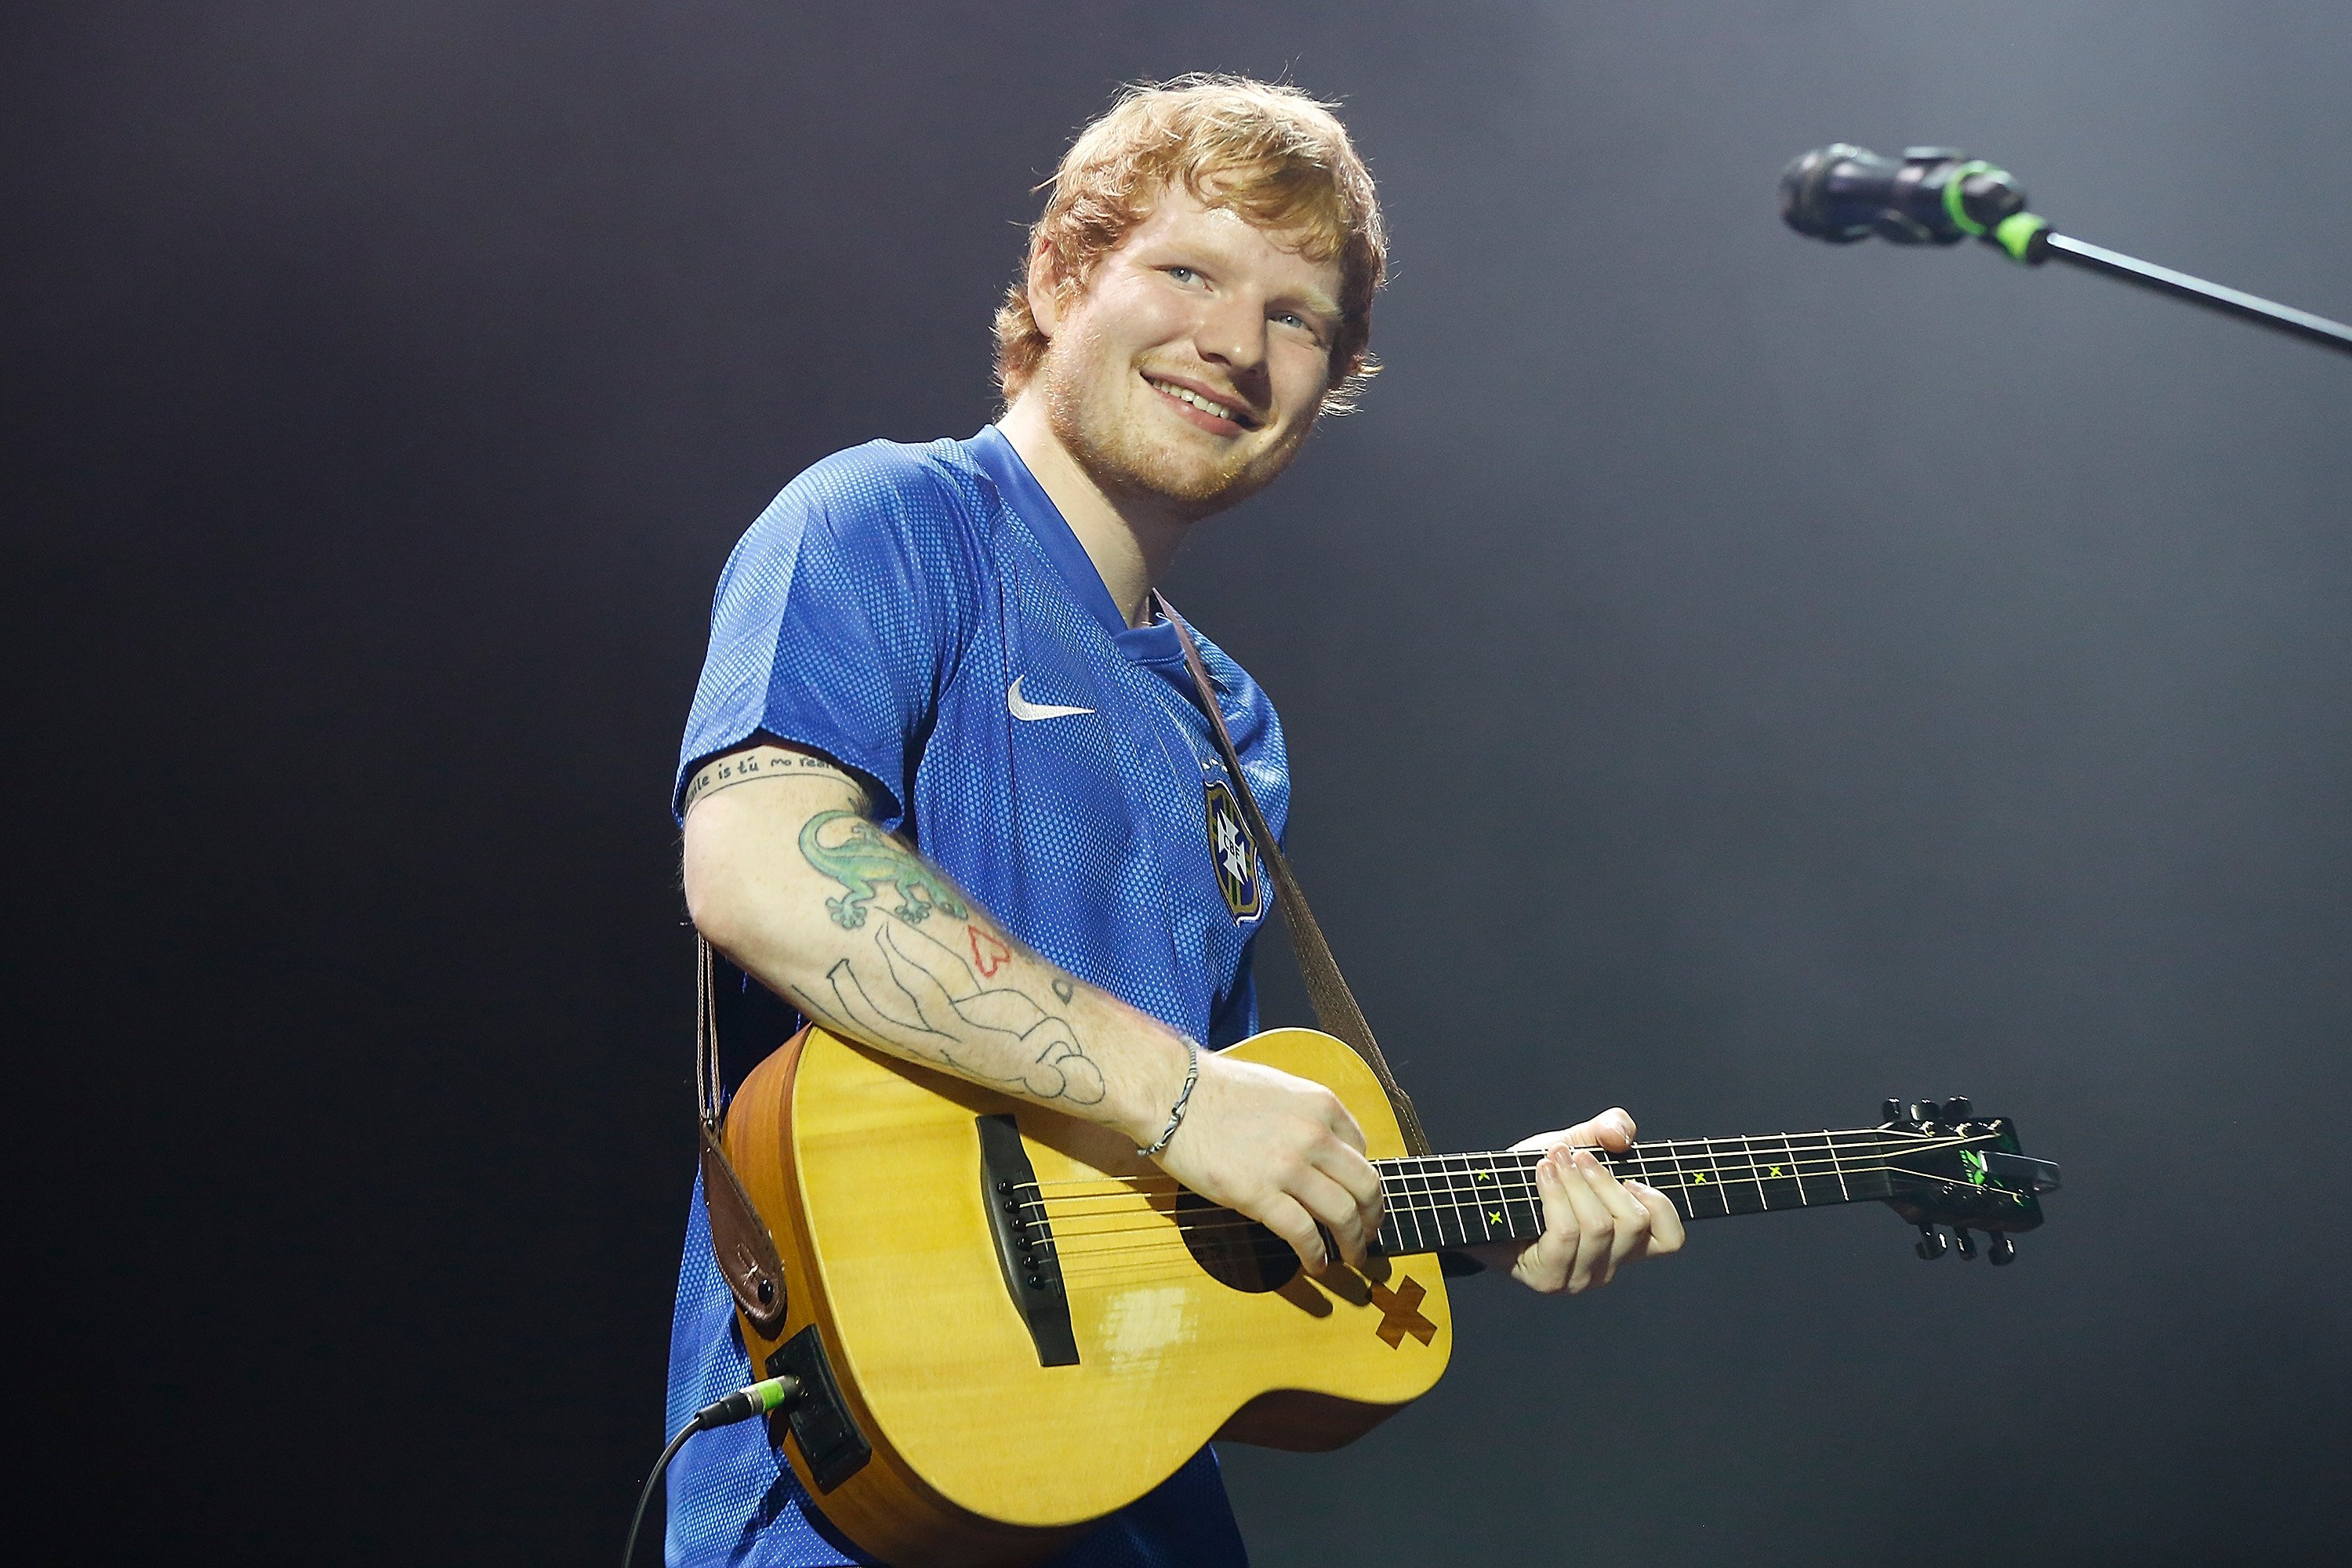 Ed Sheeran smiles during a concert in Brazil